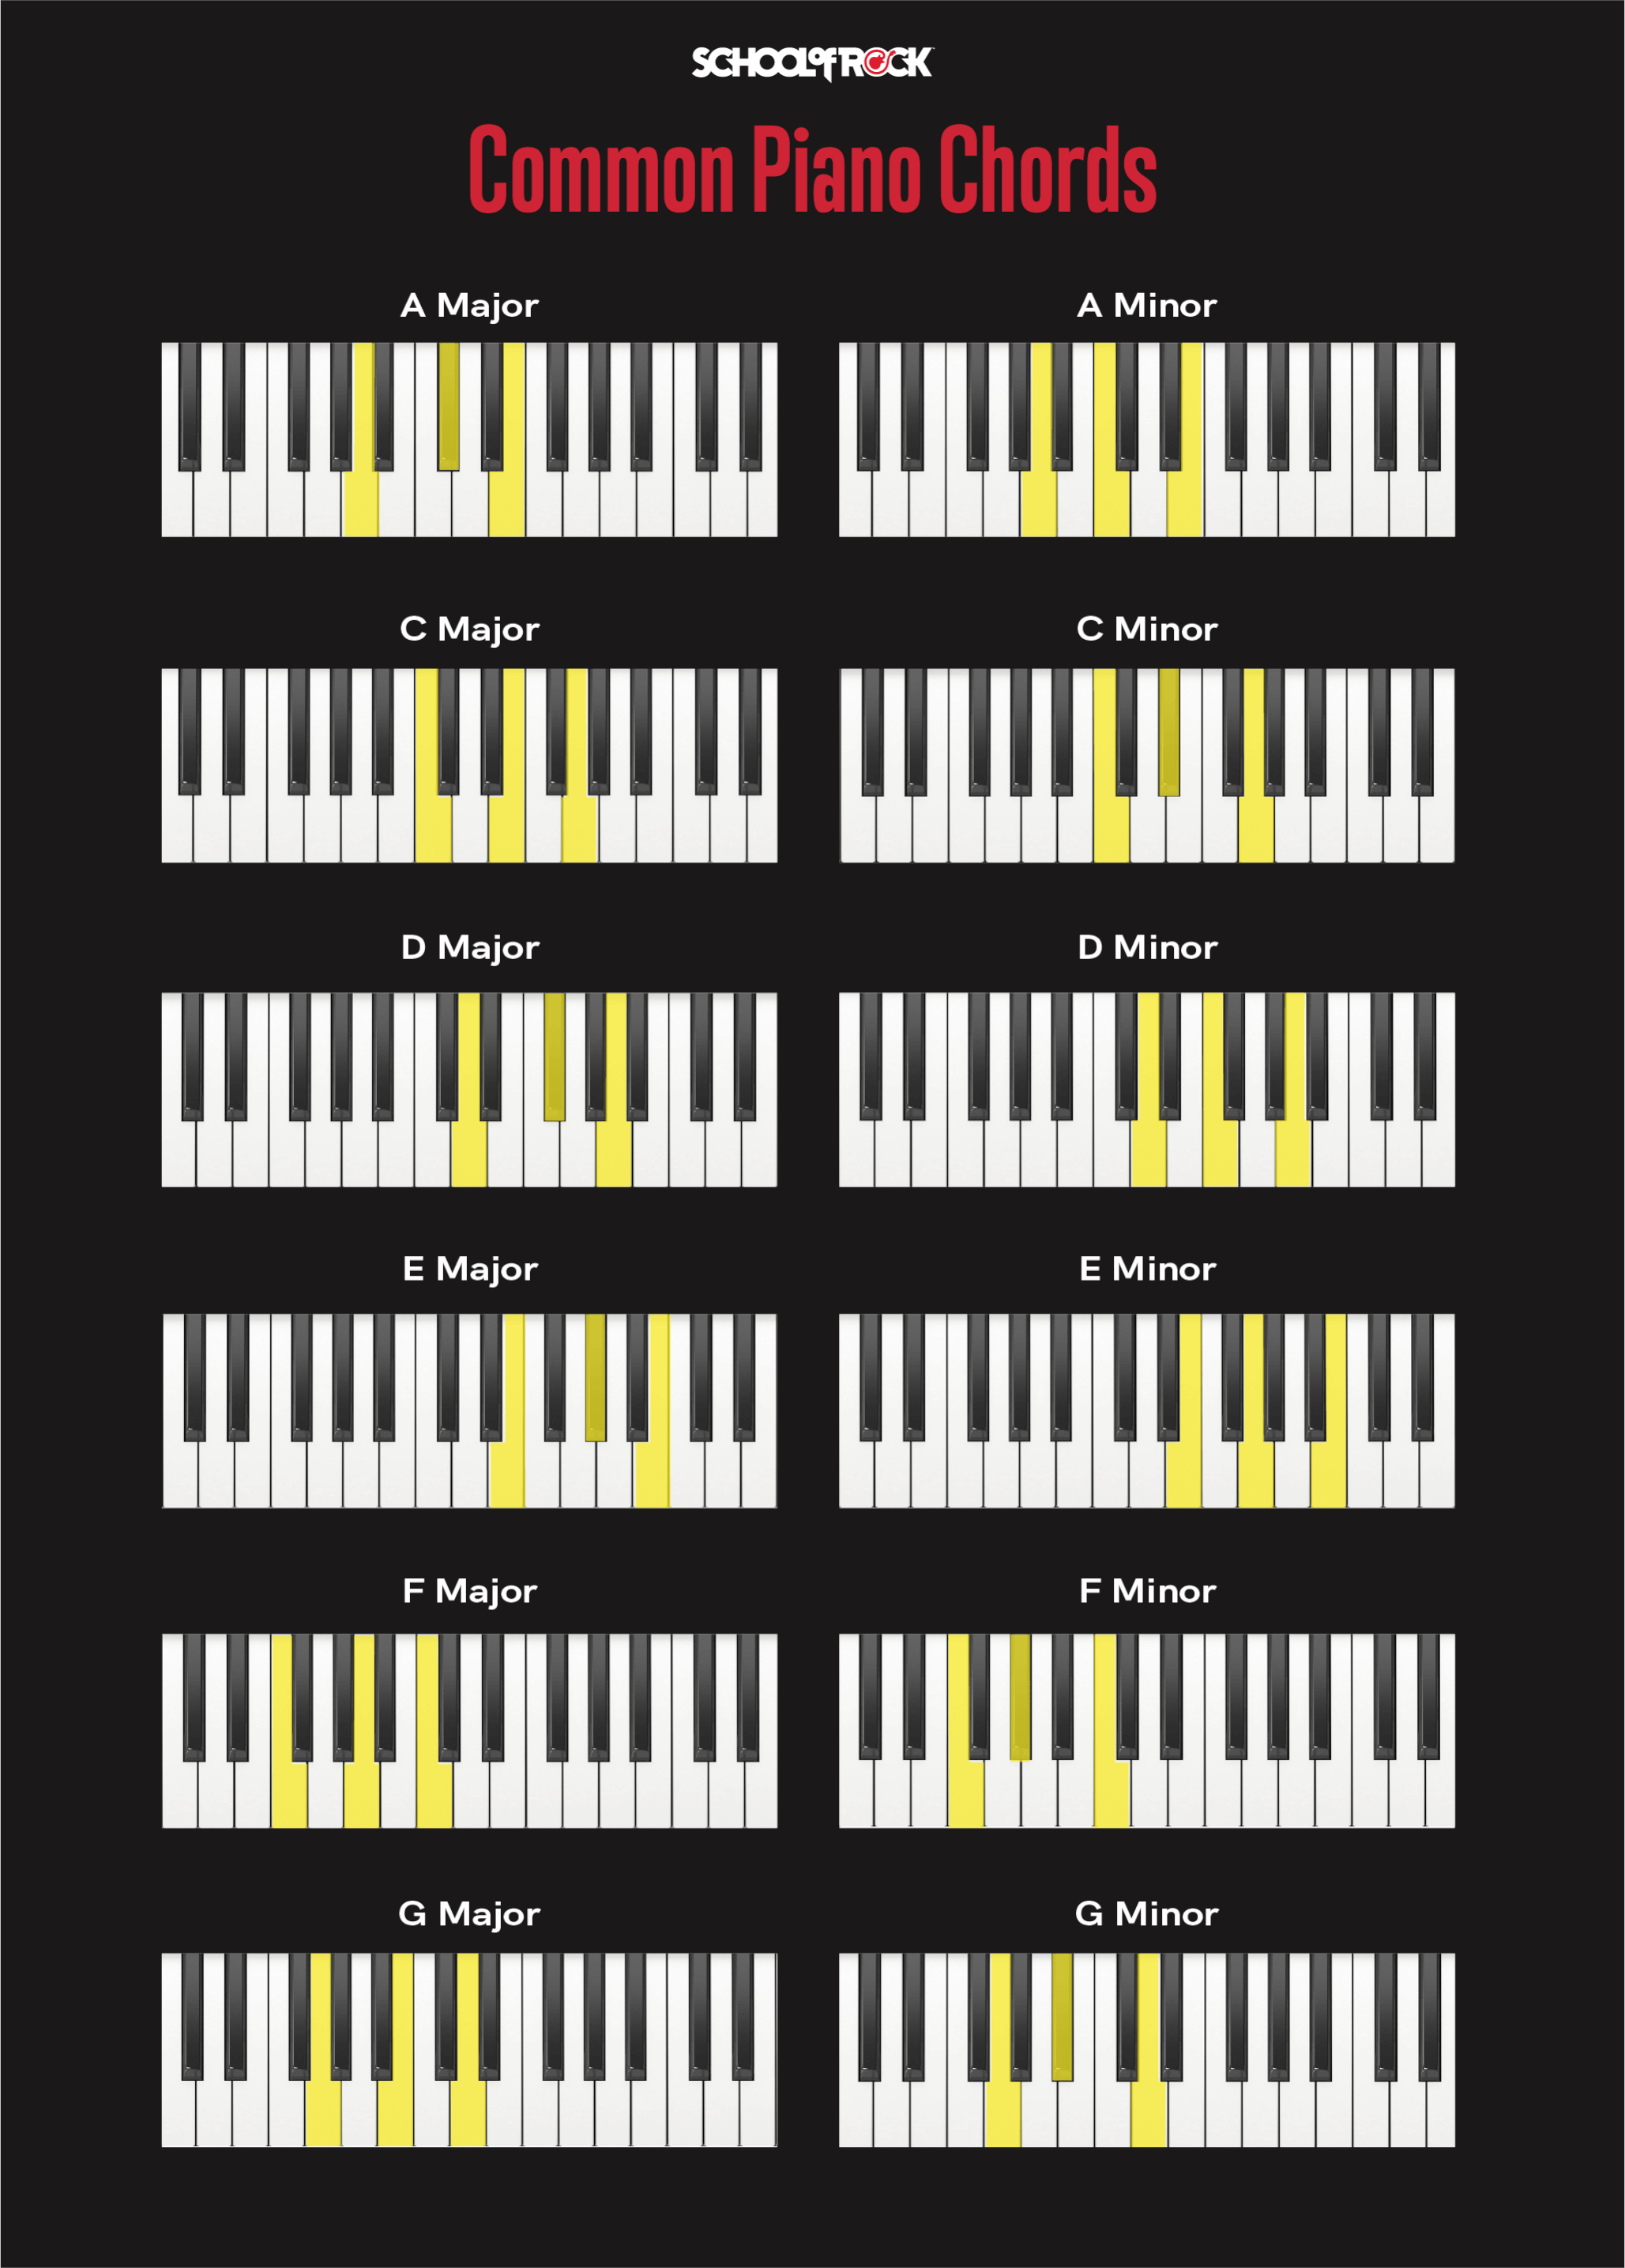 Most common piano chords include A, C, D, E, F, and G in both the major and minor scale.